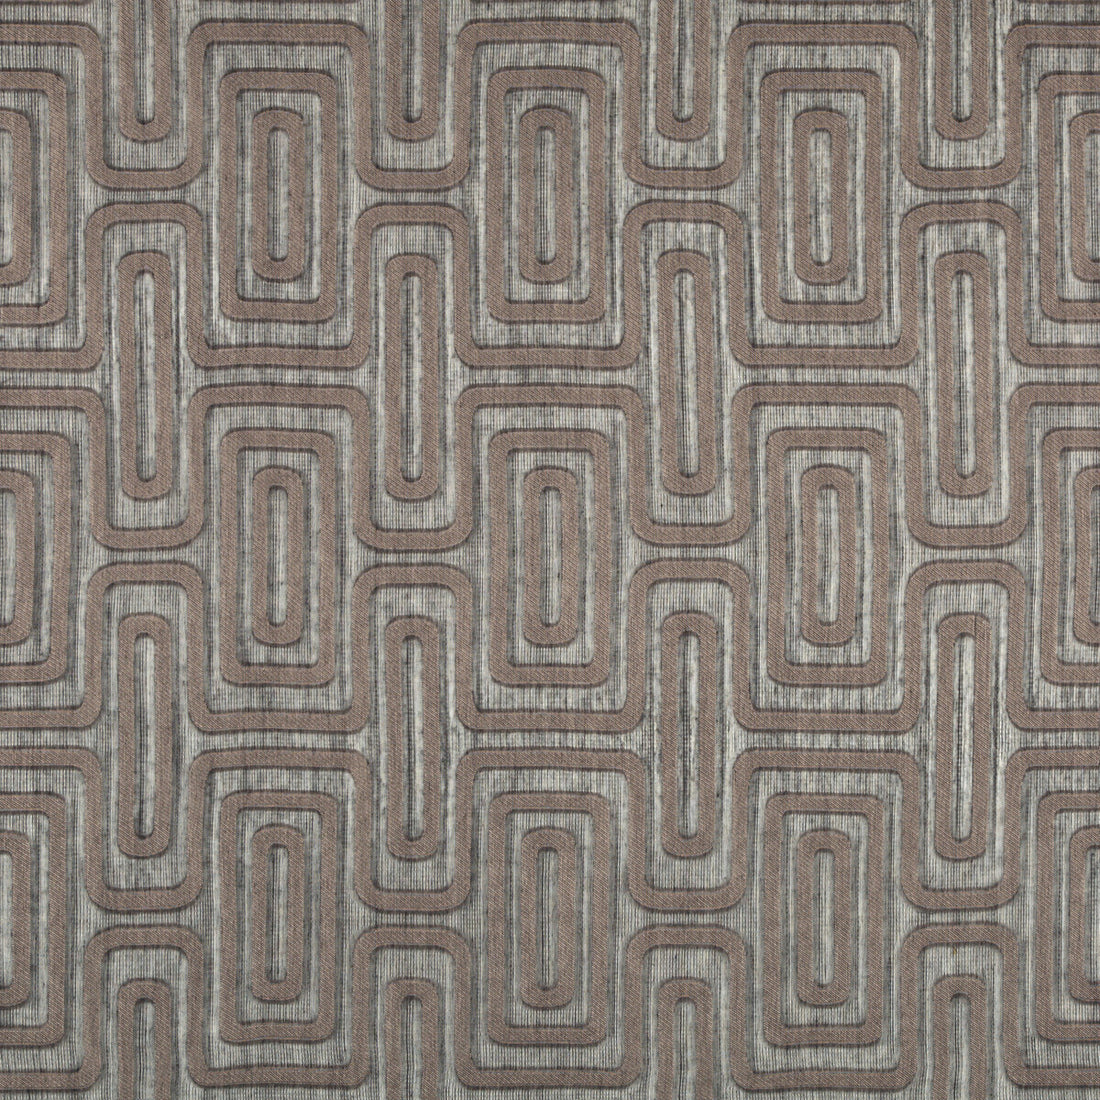 Bewilder fabric in bark color - pattern 4834.86.0 - by Kravet Contract